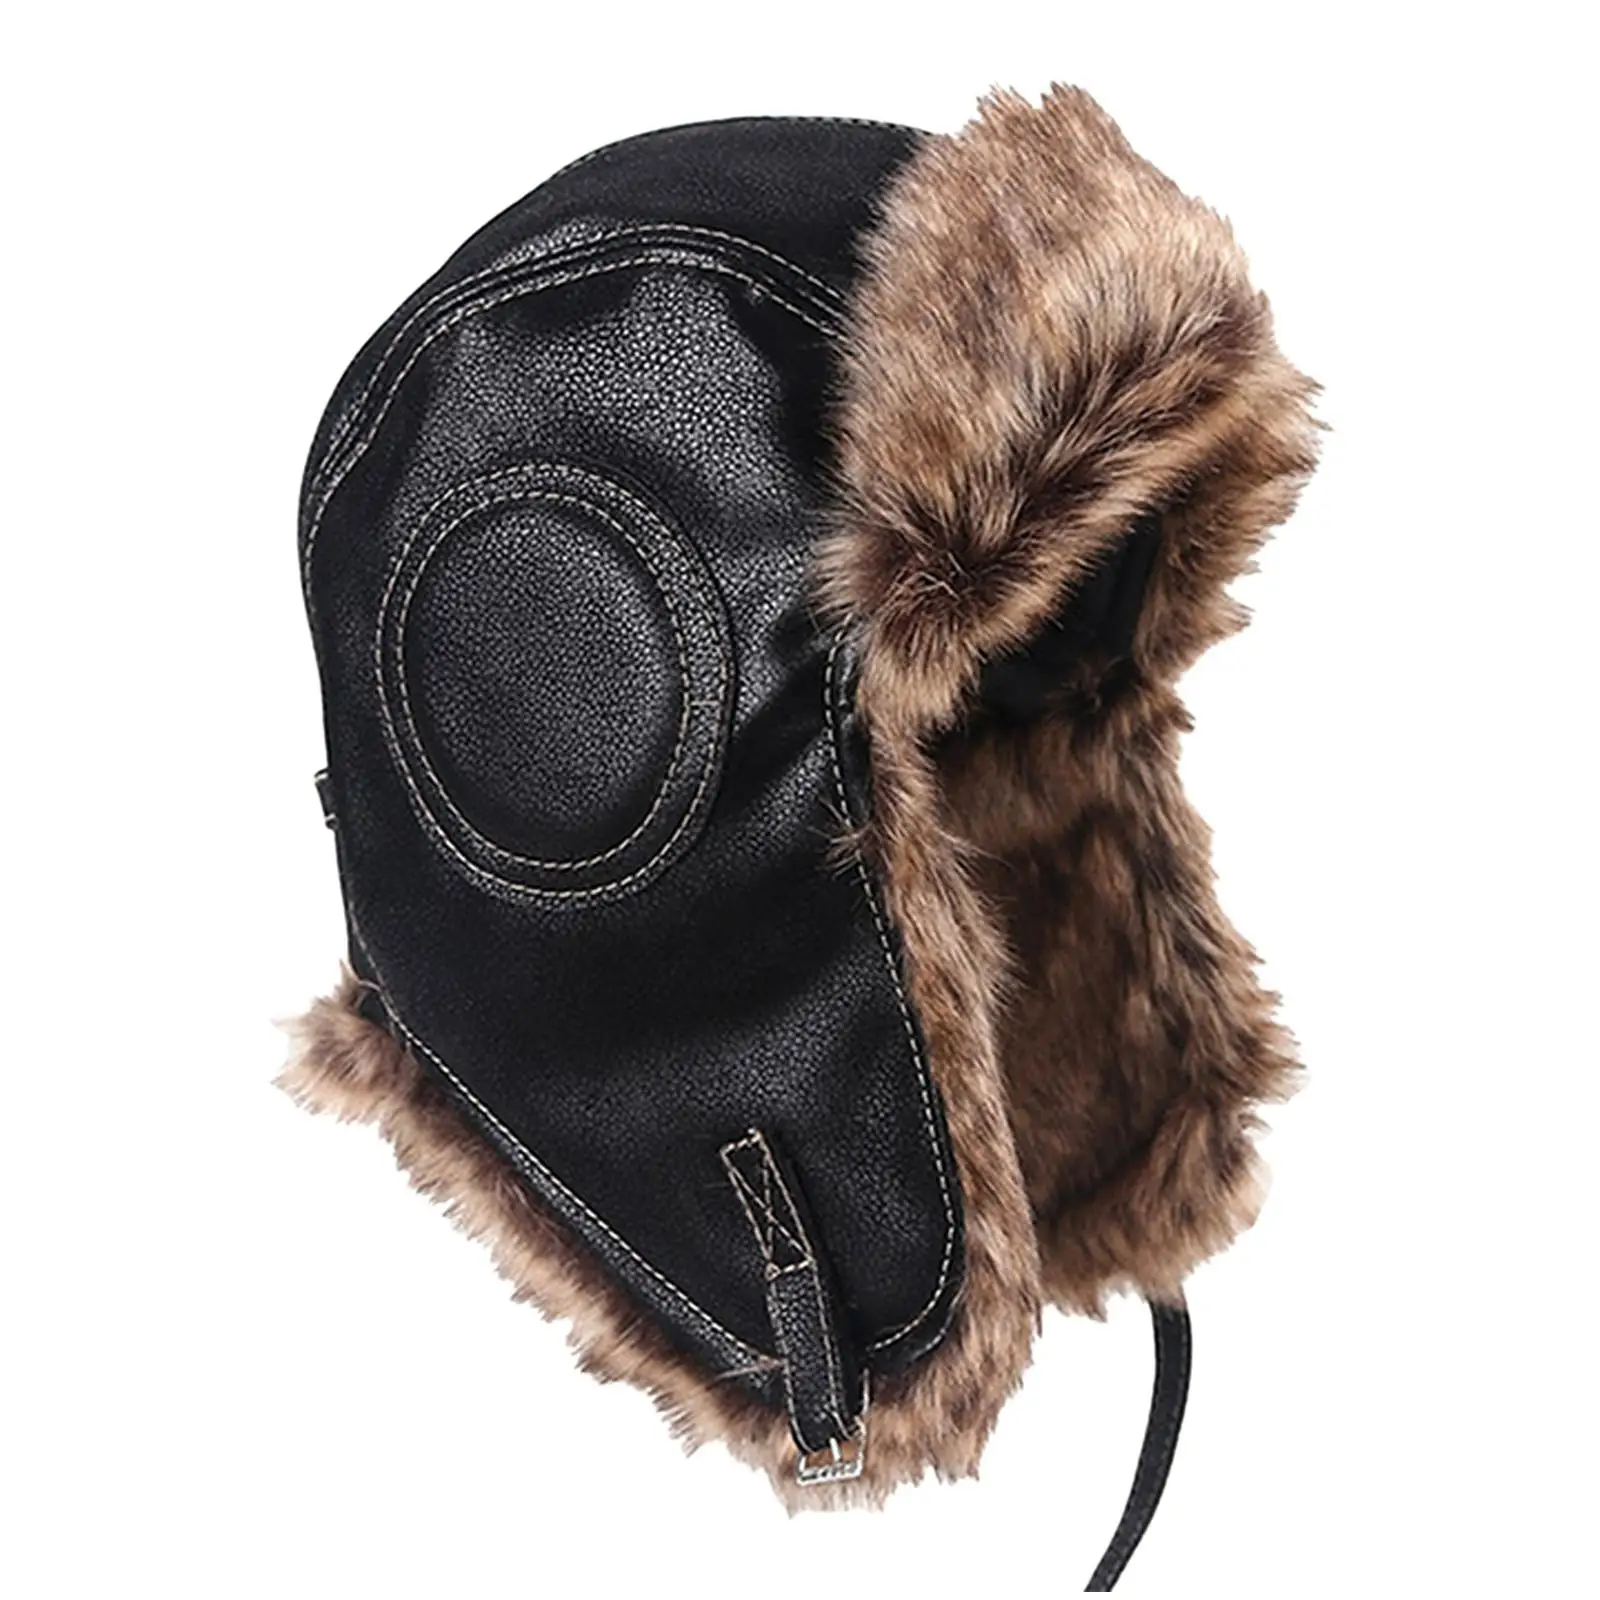 Winter Hat Thickening with Ear Flaps Windproof Thermal Cold Proof Caps Headwear Cold Weather Snow Men Women Unisex Adult